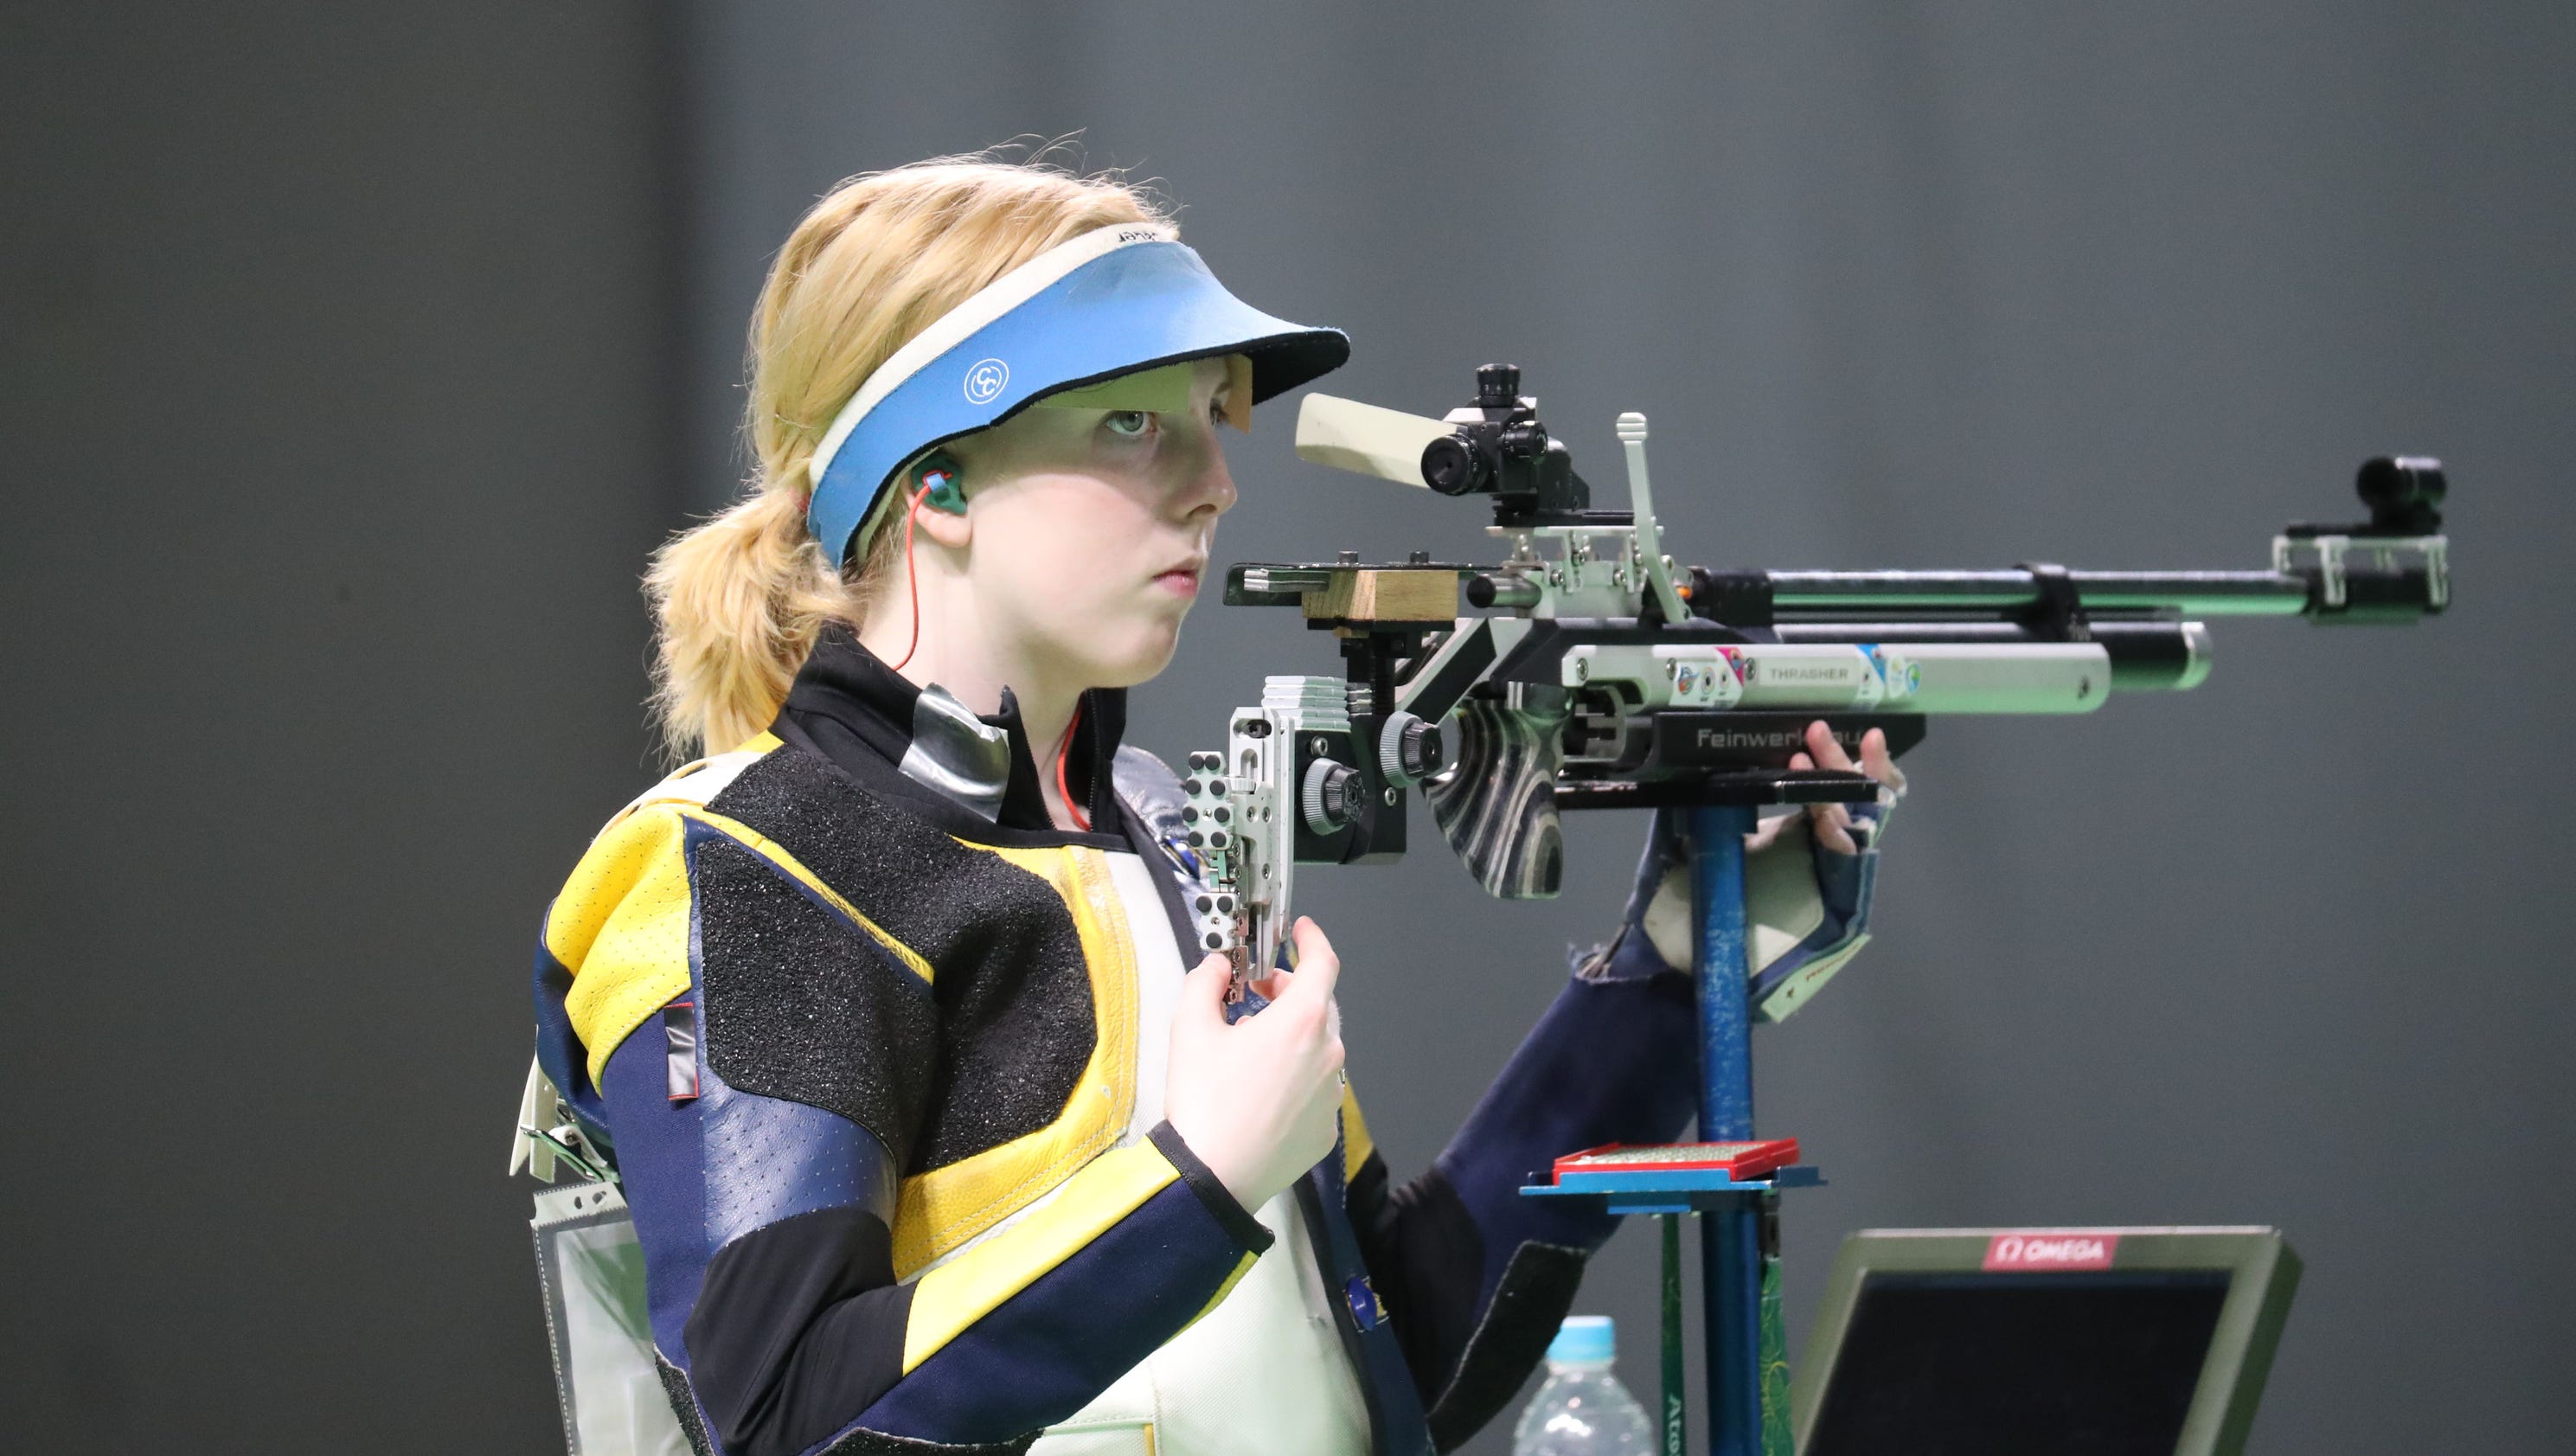 Shooting gold medalist Ginny Thrasher laments controversy over gun laws3200 x 1680